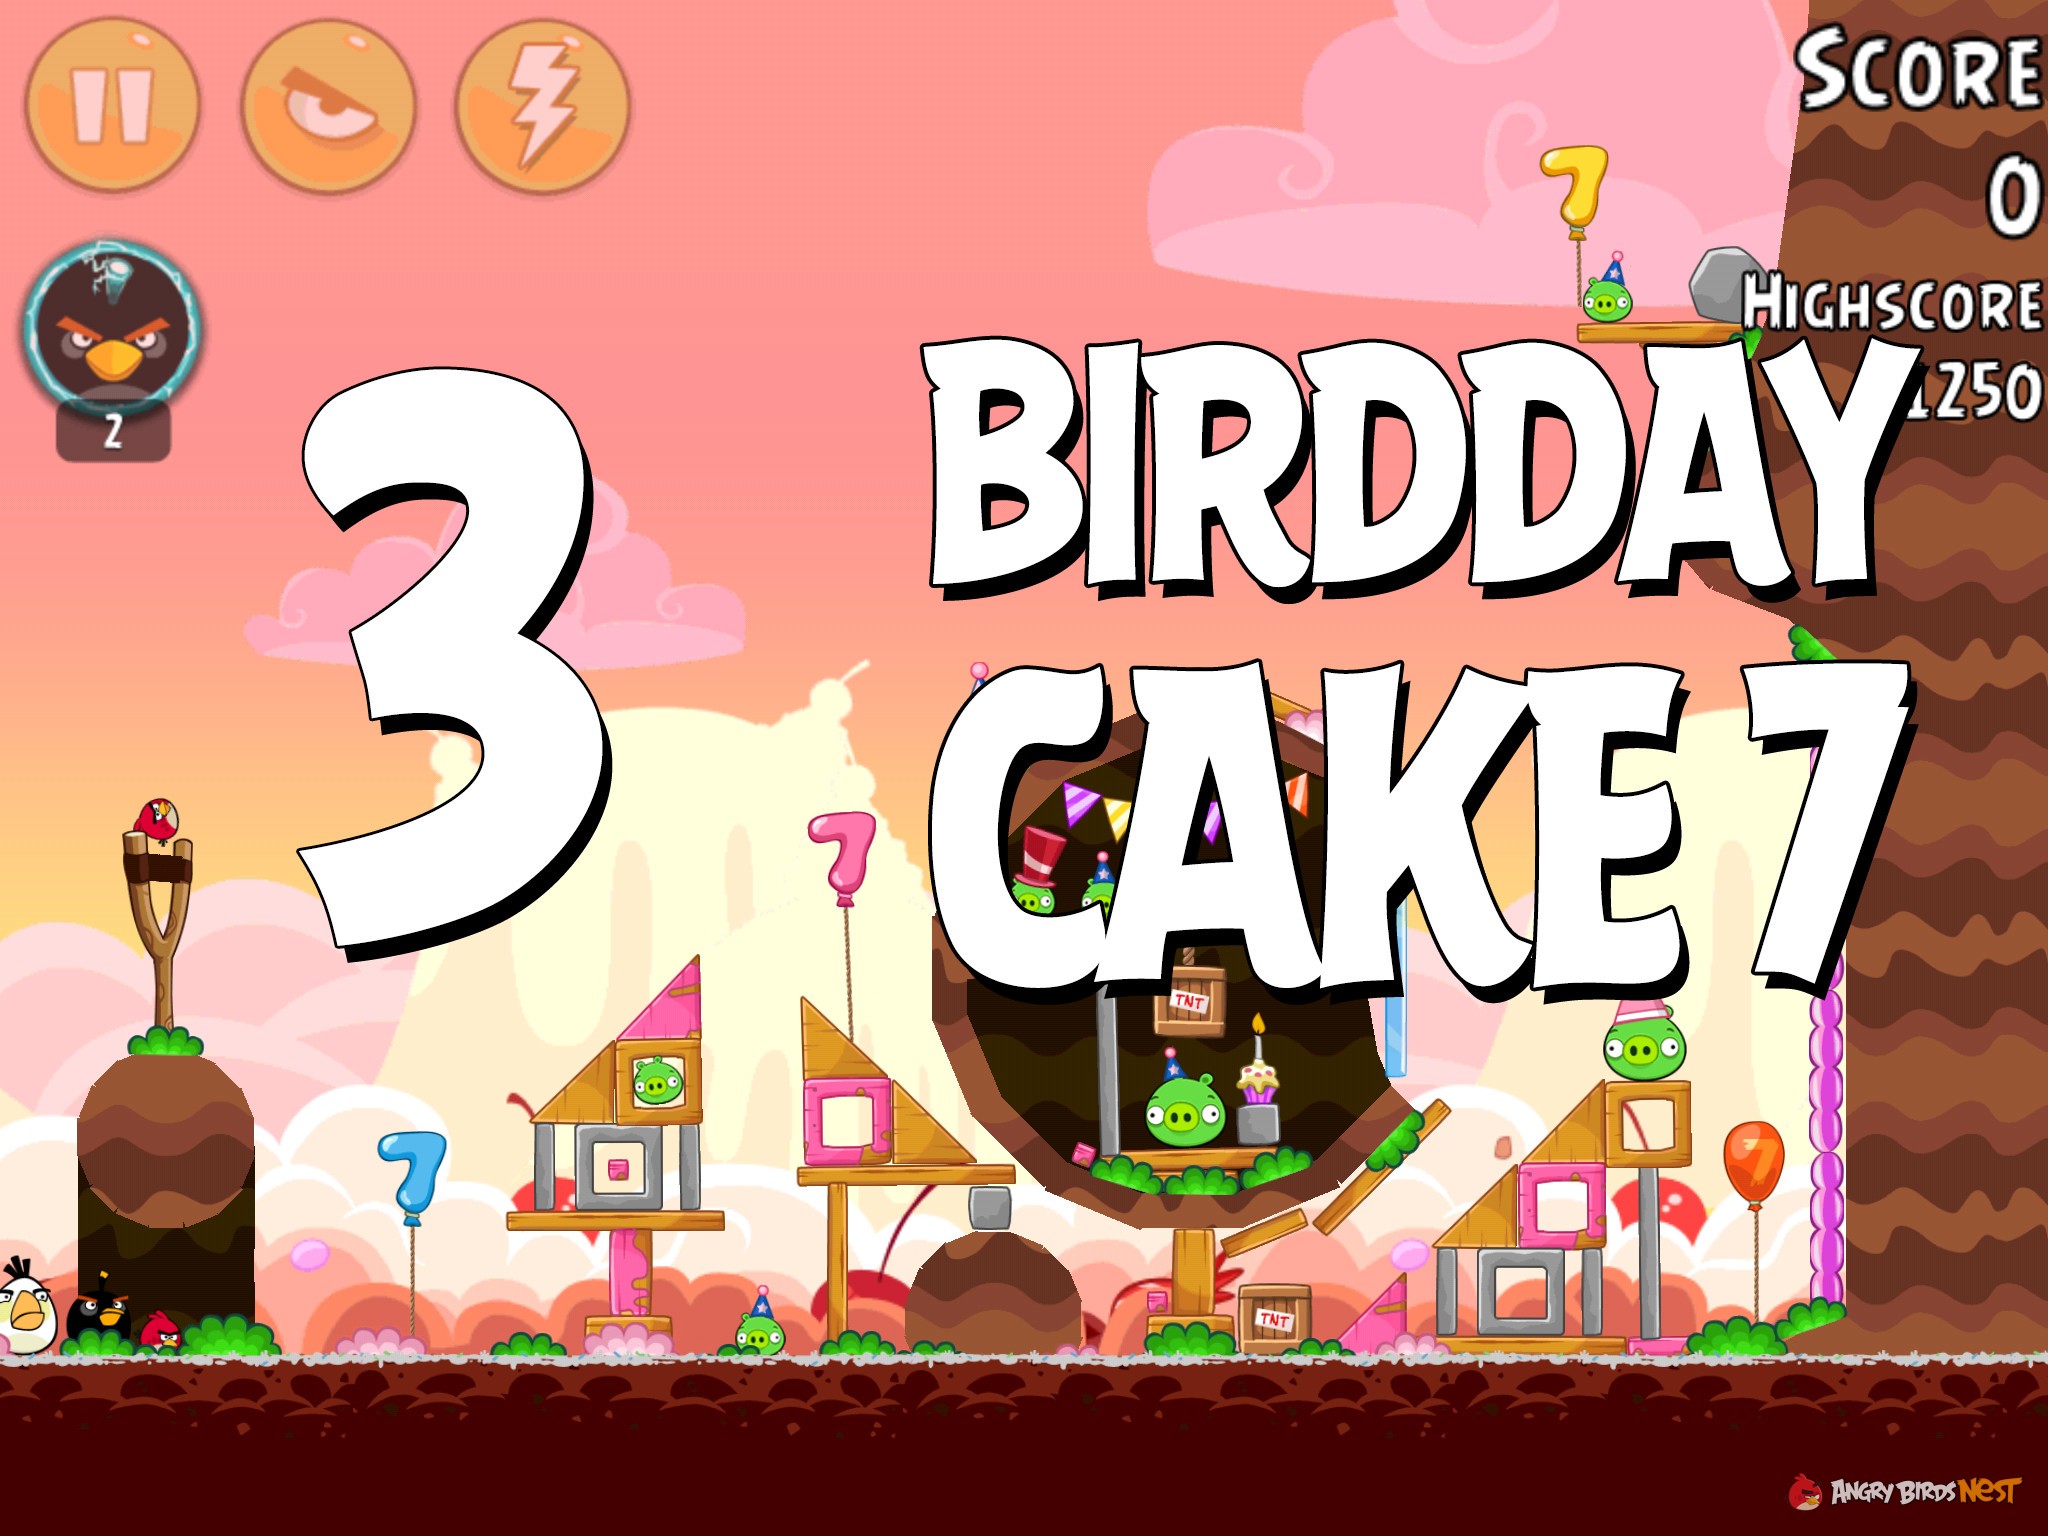 Angry-Birds-Birdday-Party-Cake-7-Level-3